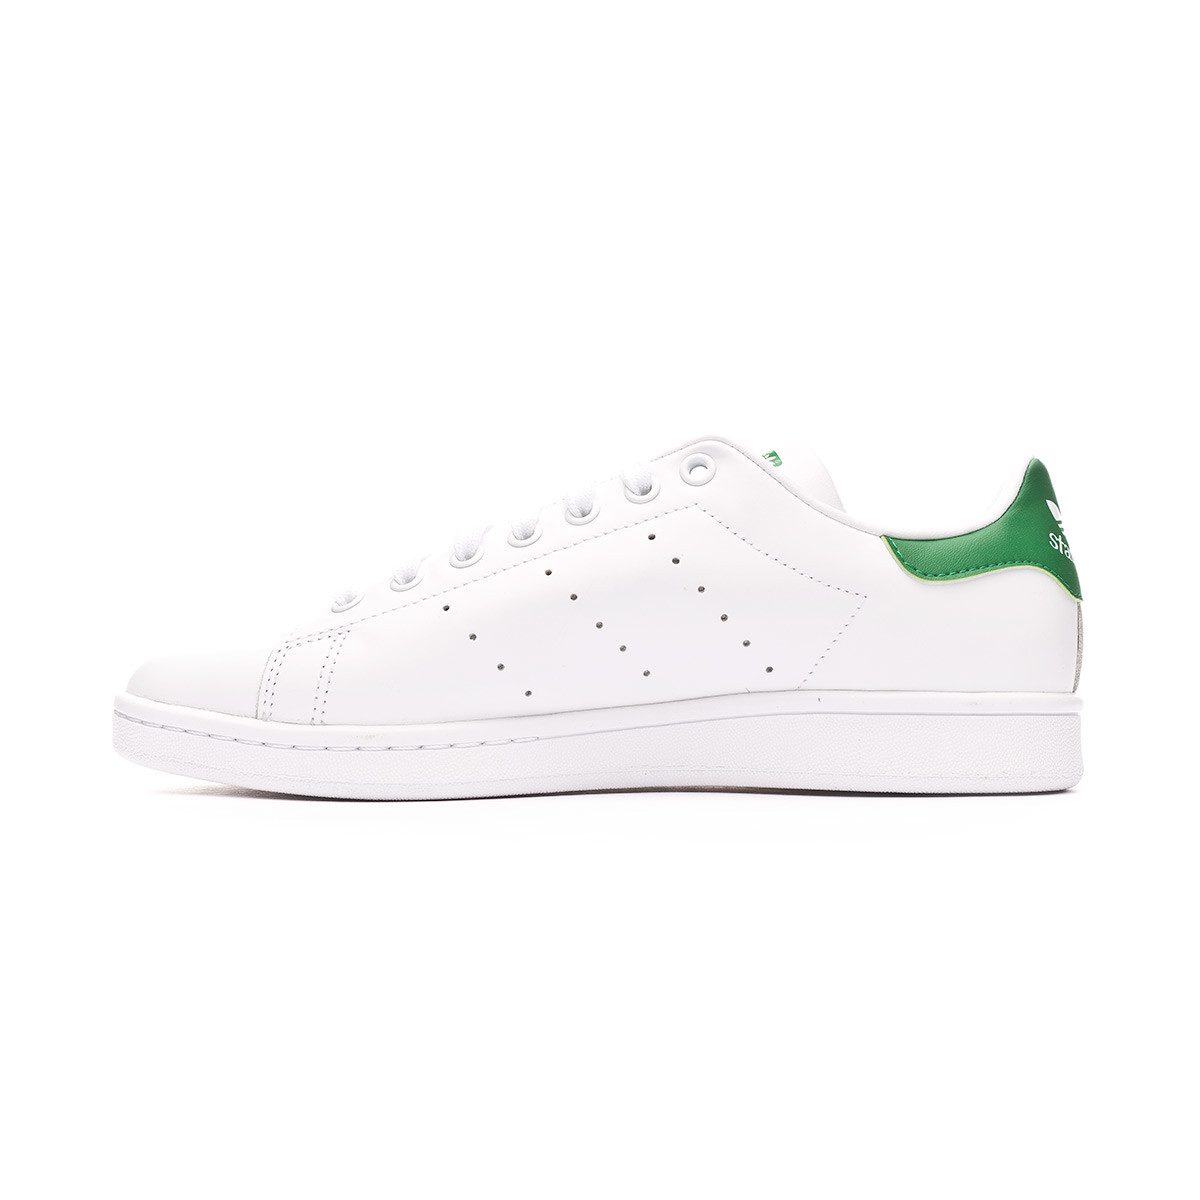 adidas stan smith trainers green